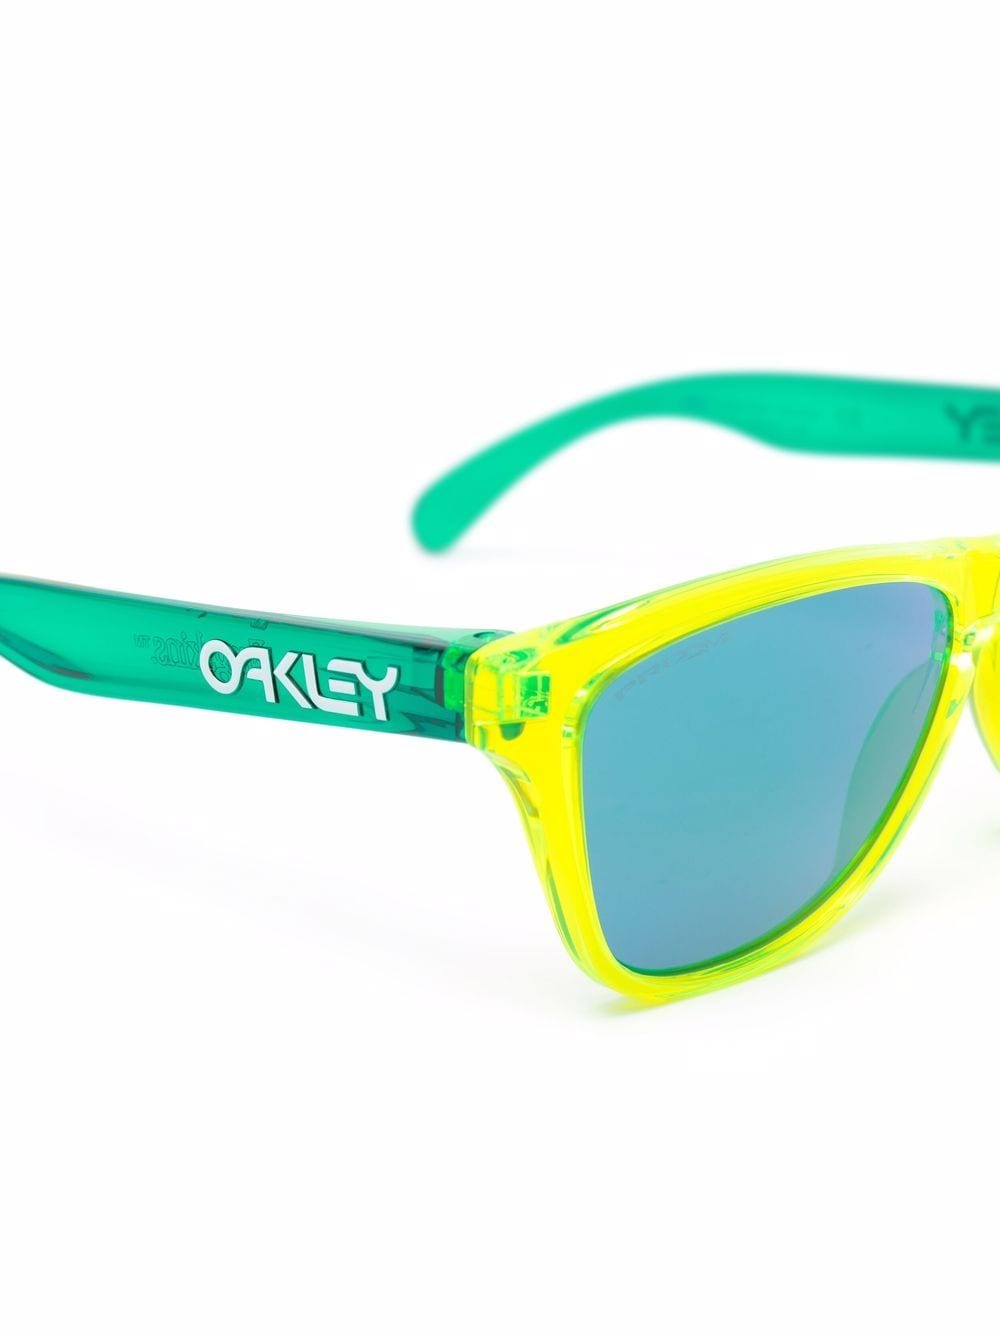 Green/yellow two-tone frame (Youth Fit) sunglasses